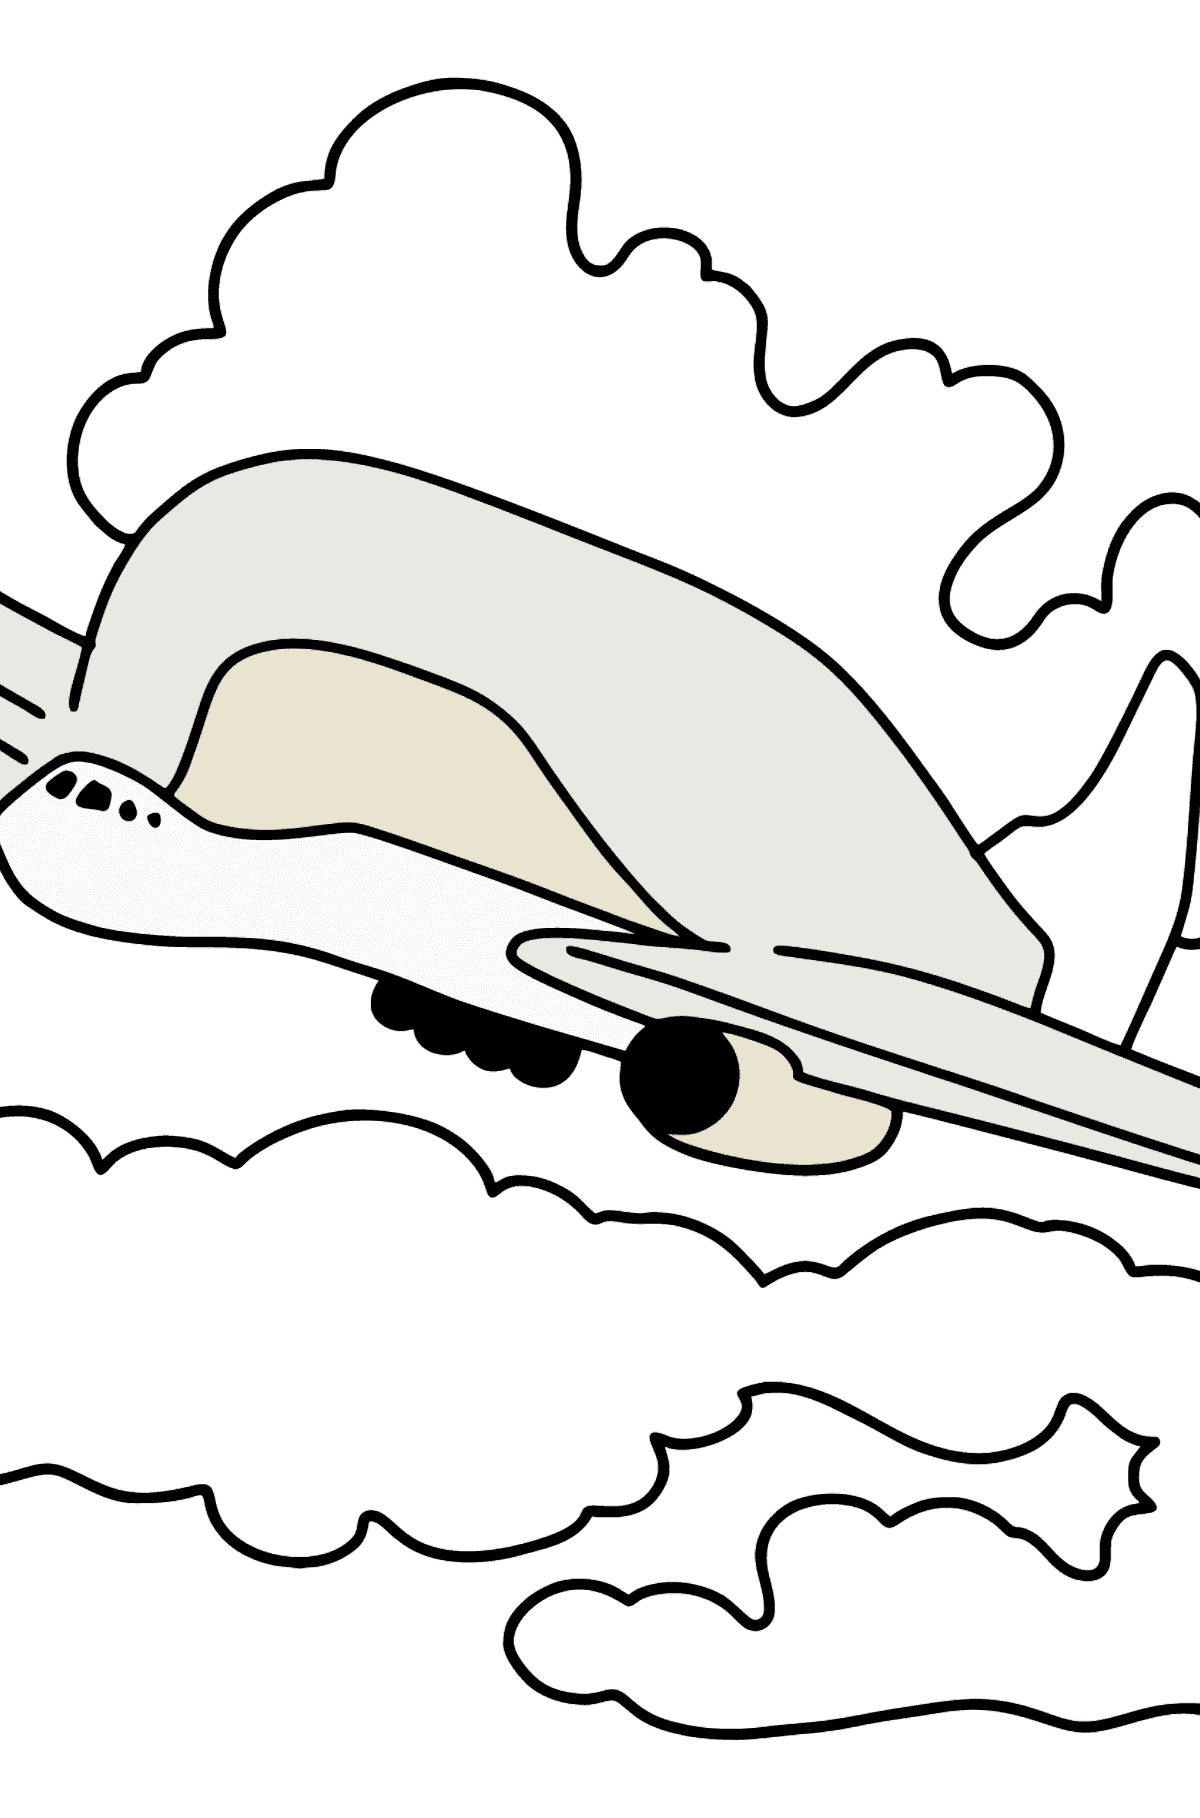 Cargo Plane coloring page - Coloring Pages for Kids